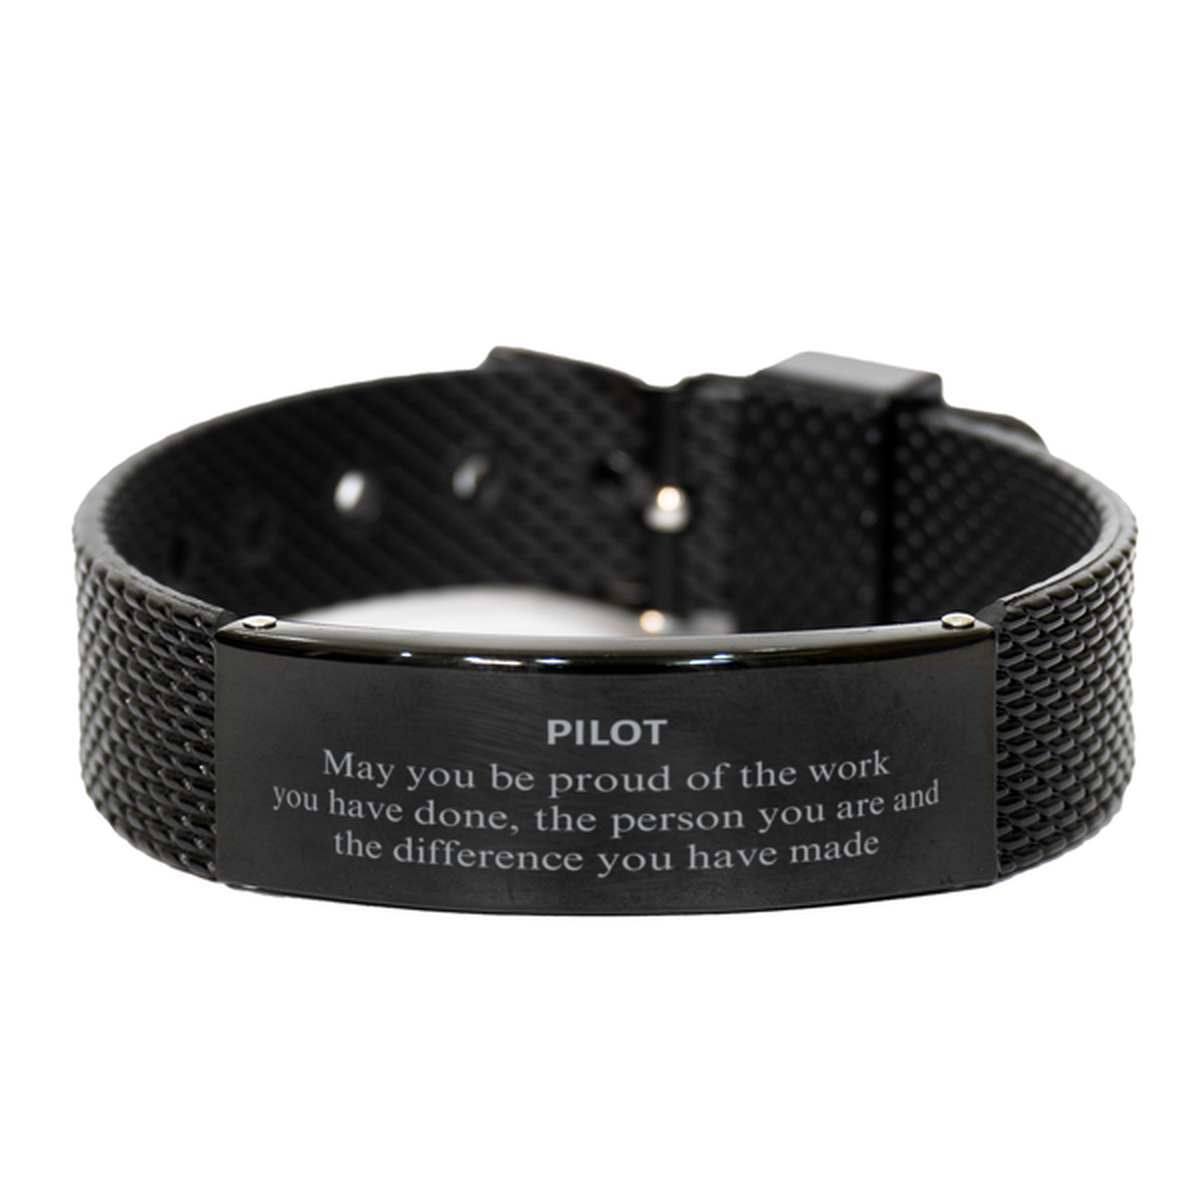 Pilot May you be proud of the work you have done, Retirement Pilot Black Shark Mesh Bracelet for Colleague Appreciation Gifts Amazing for Pilot